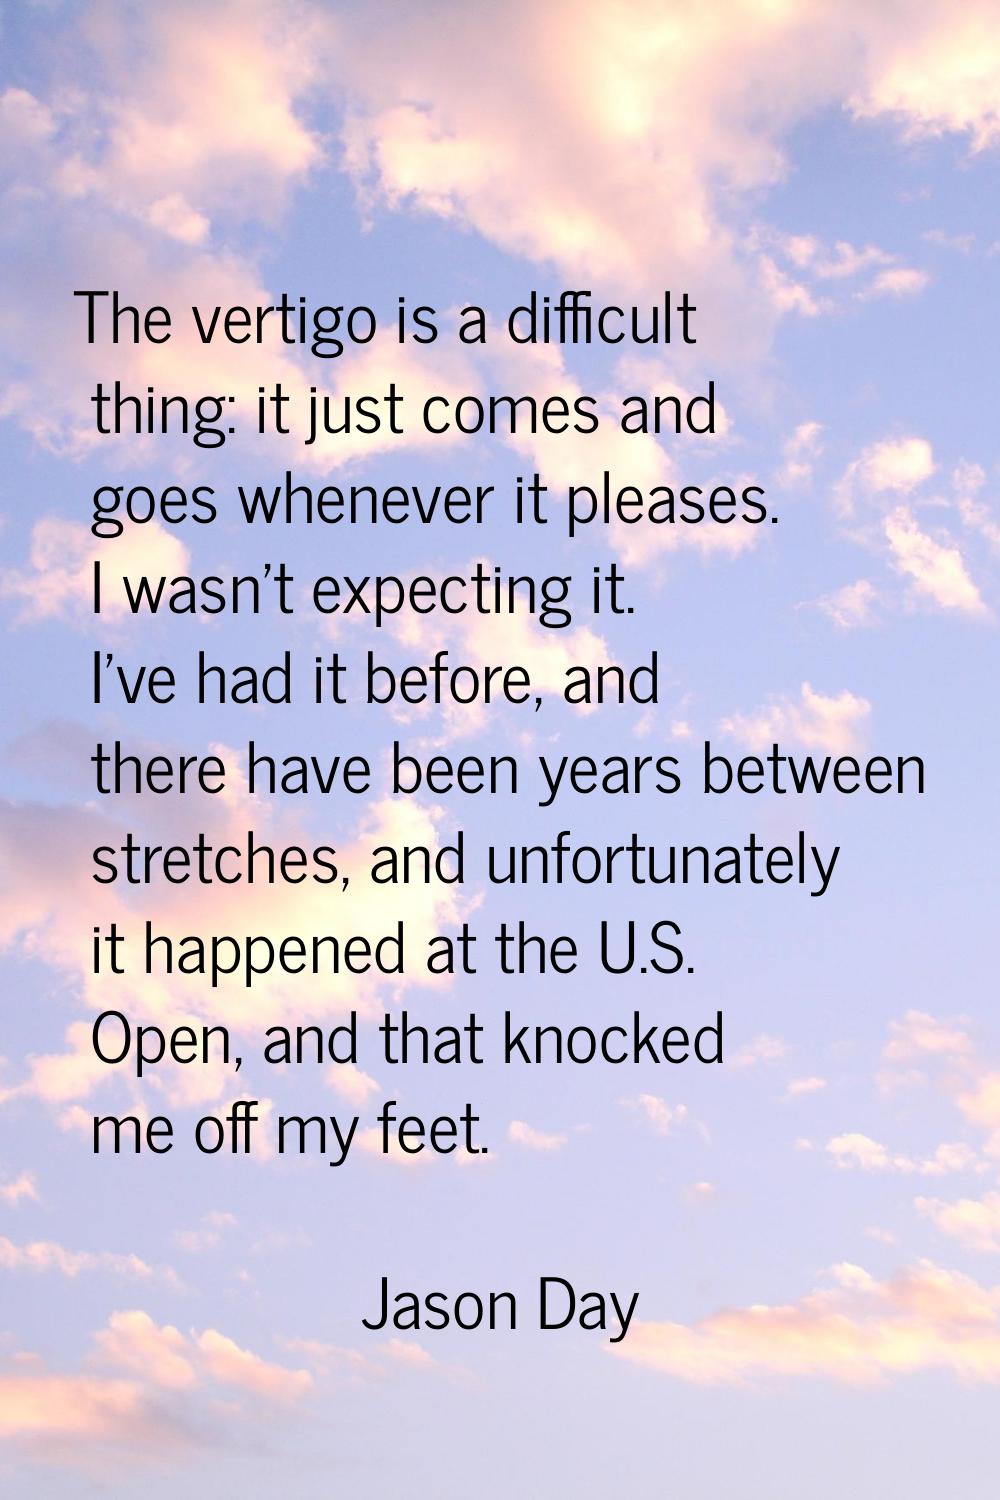 The vertigo is a difficult thing: it just comes and goes whenever it pleases. I wasn't expecting it